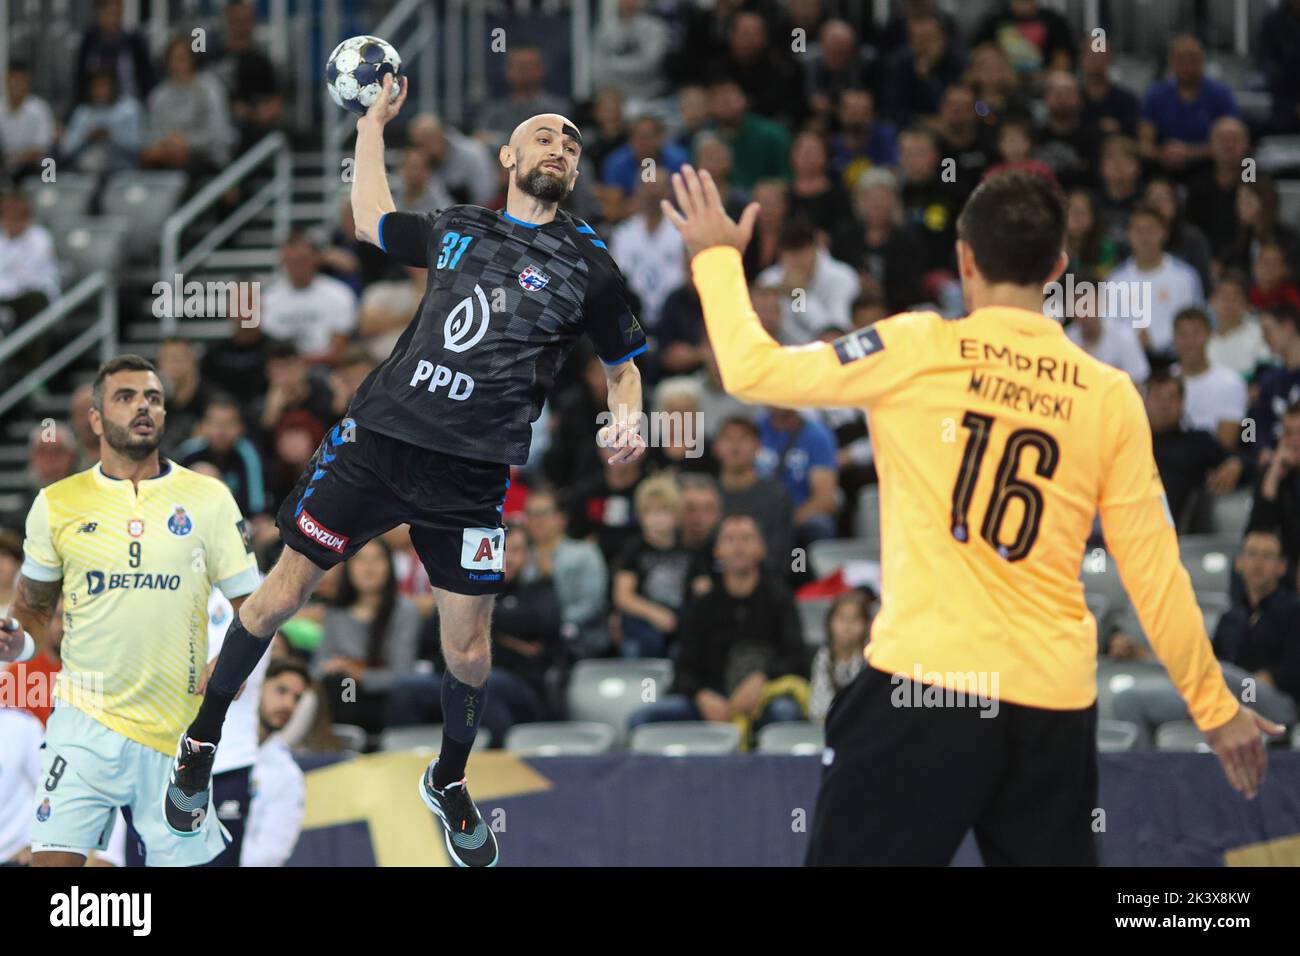 Zagreb, Croatia. 28th Sep, 2022. Timur Dibirov of PPD Zagreb and Pedro Cruz of FC Porto in action during the handball match between PPD Zagreb and FC Porto as a part of the third round of Machineseeker EHF Champions League in Zagreb, Croatia on september 28, 2022. Photo: Slavko Midzor/PIXSELL Credit: Pixsell photo & video agency/Alamy Live News Stock Photo